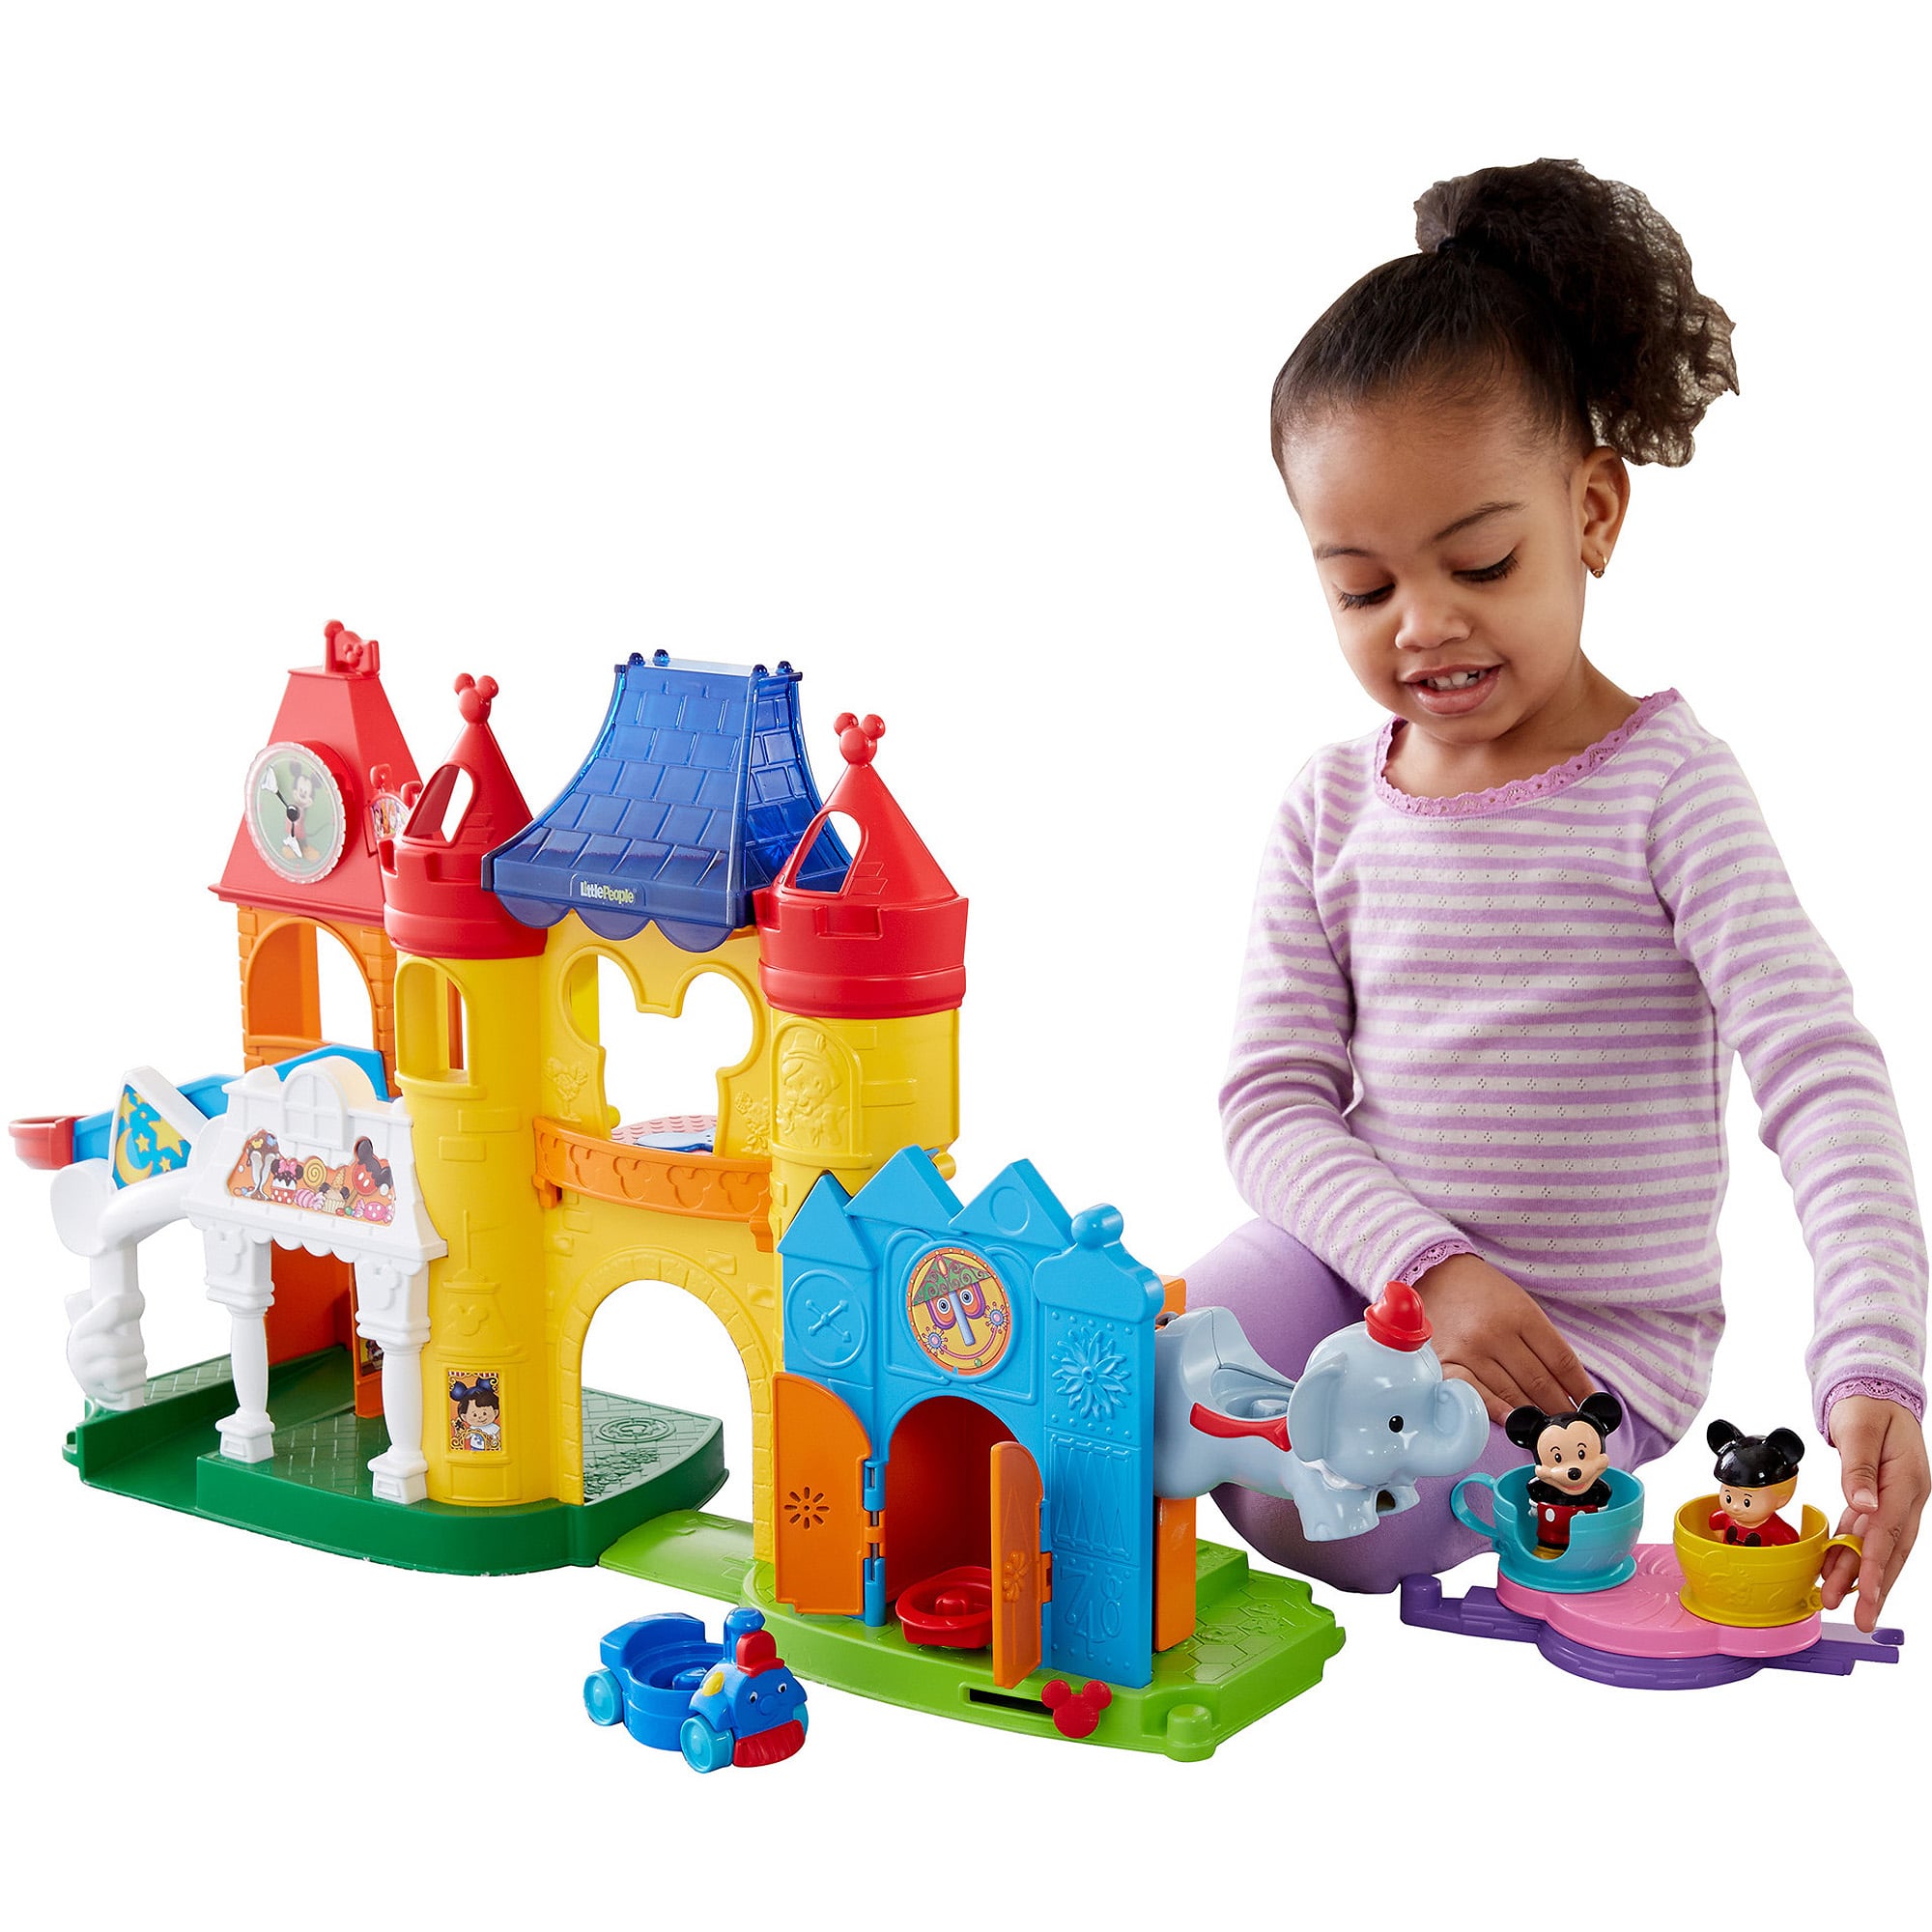 little people toddler toys